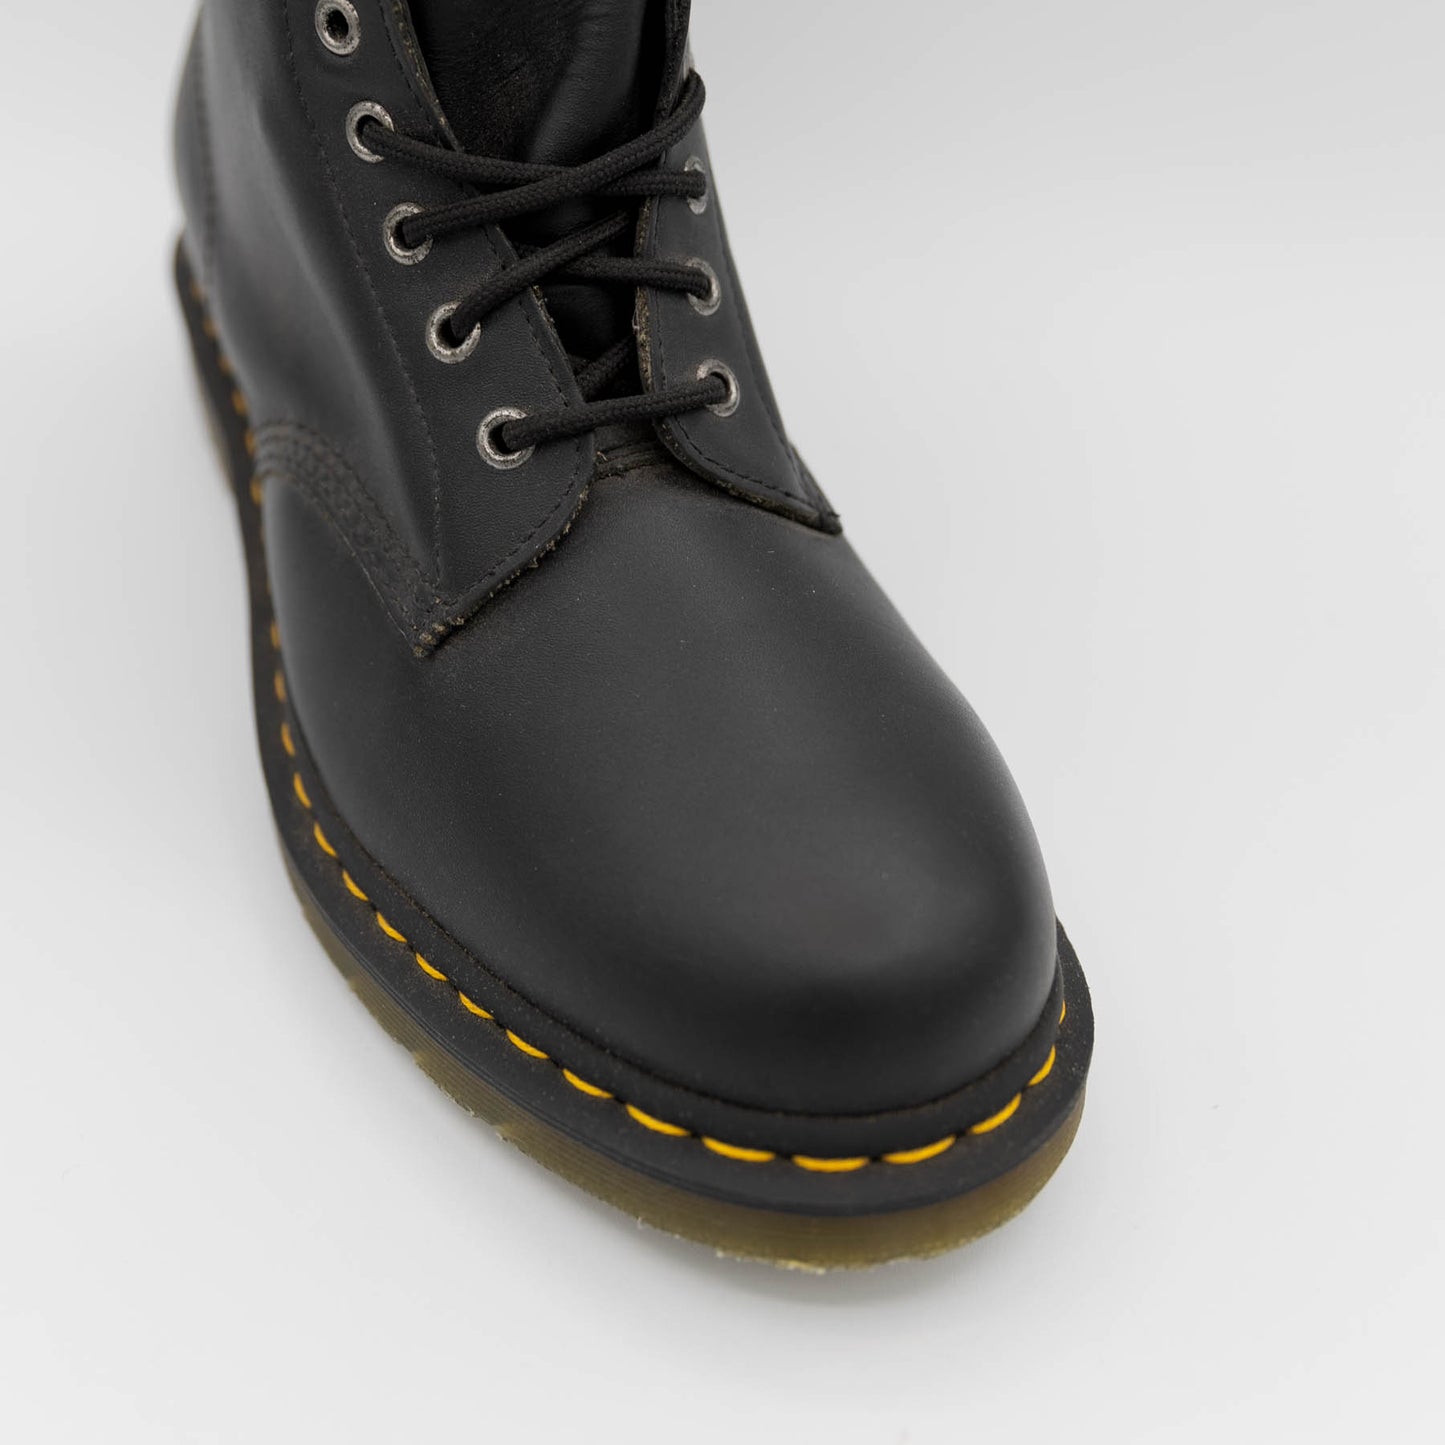 Dr. Martens 1460 Leather Lace Up Boots